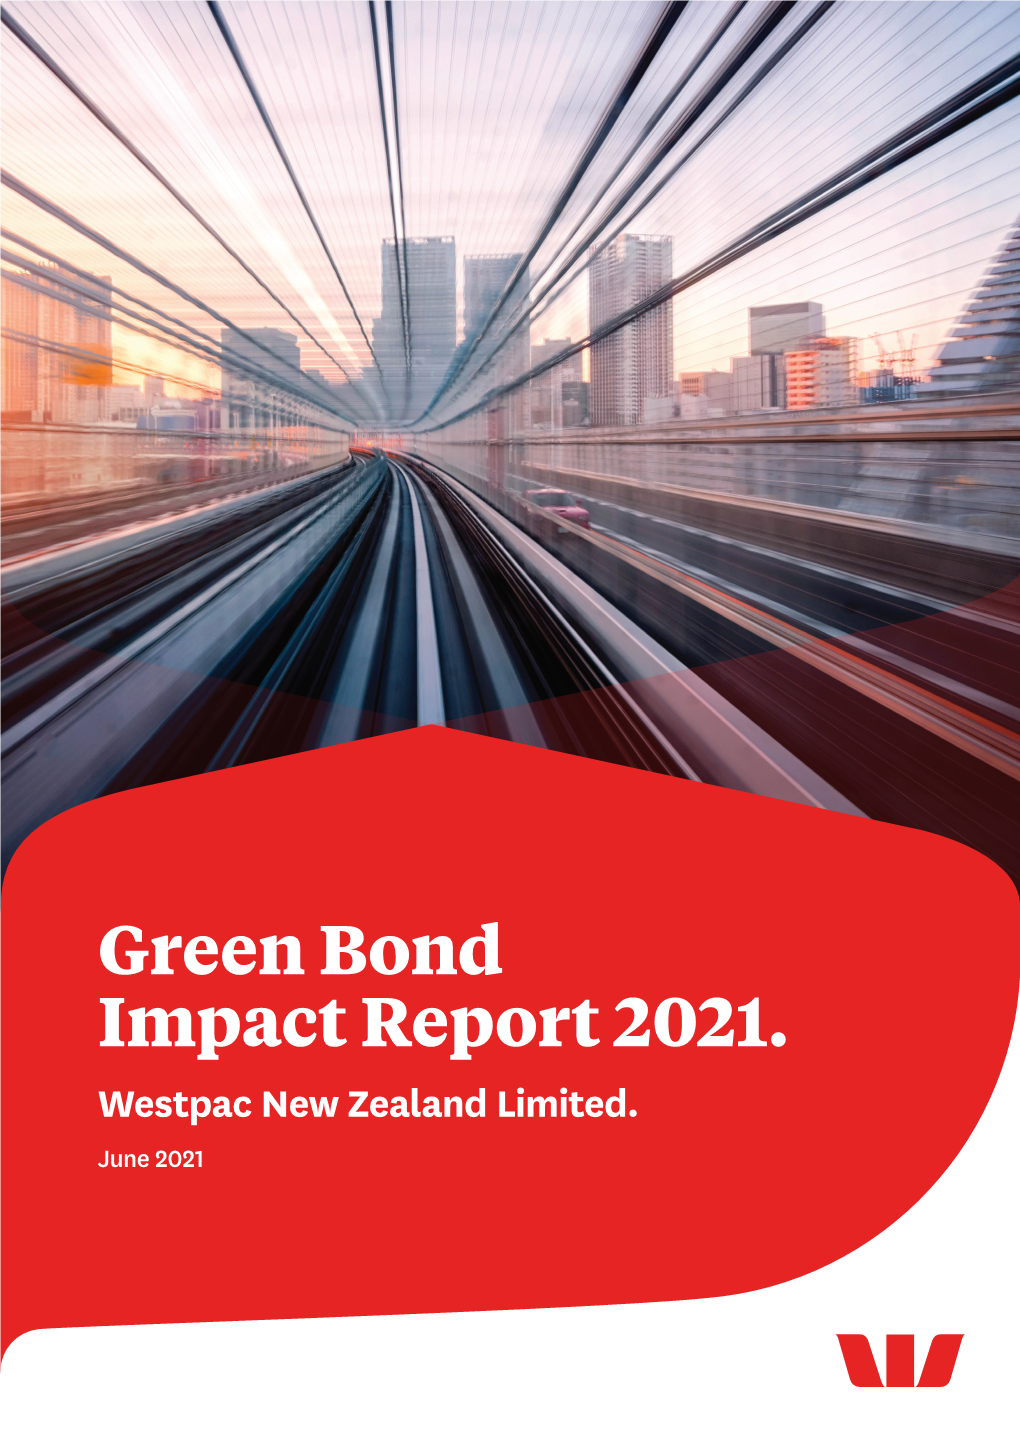 Green Bond Impact Report 2021. Westpac New Zealand Limited